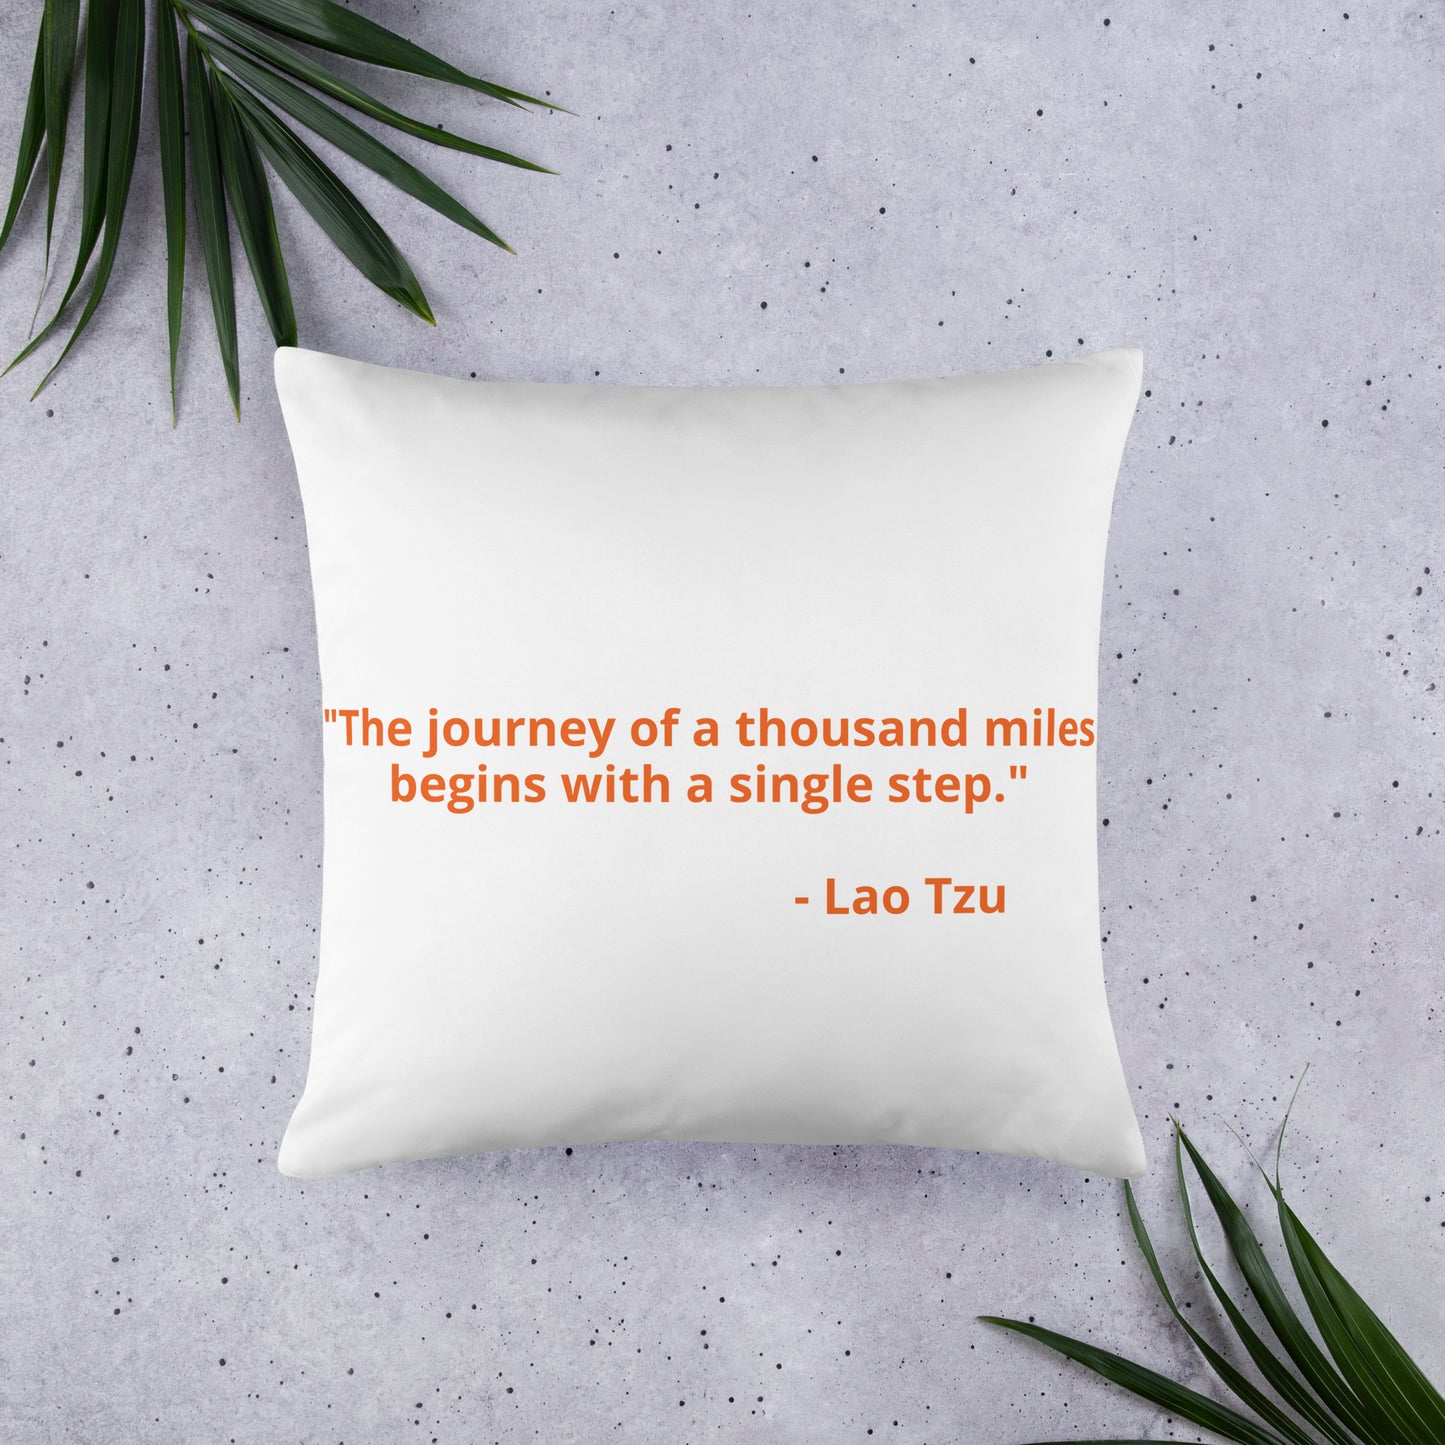 "The journey of a thousand miles begins with a single step." - Lao Tzu - Basic Pillow